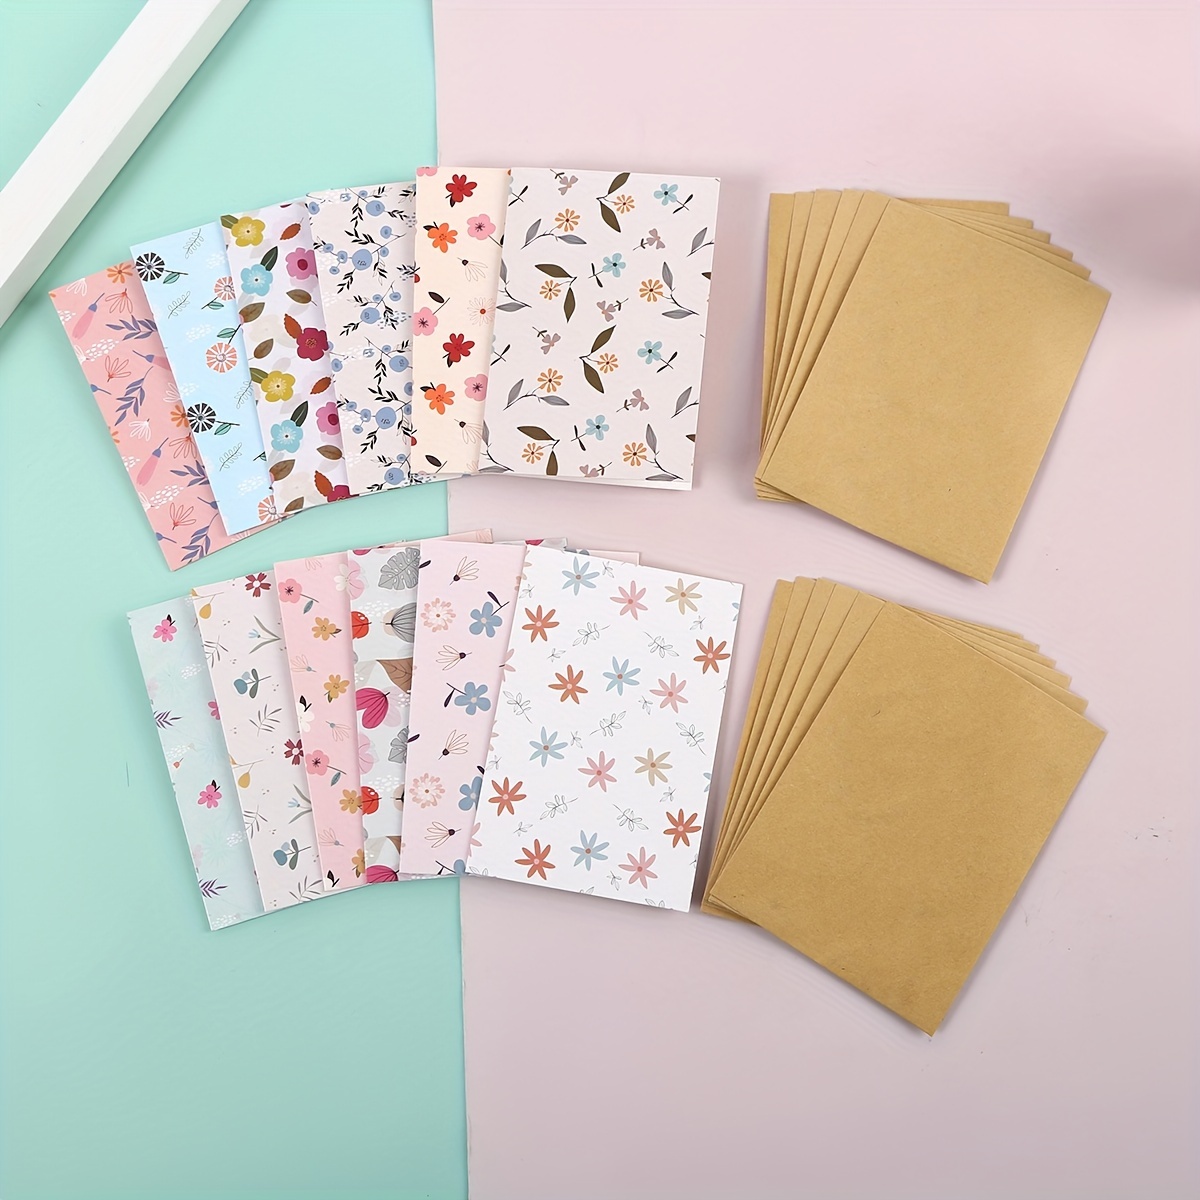 8pcs Message Cards Notepads Stationery Cards Portable Memo Cards Word Cards, Size: 3.54 x 2.17 x 0.59, Other